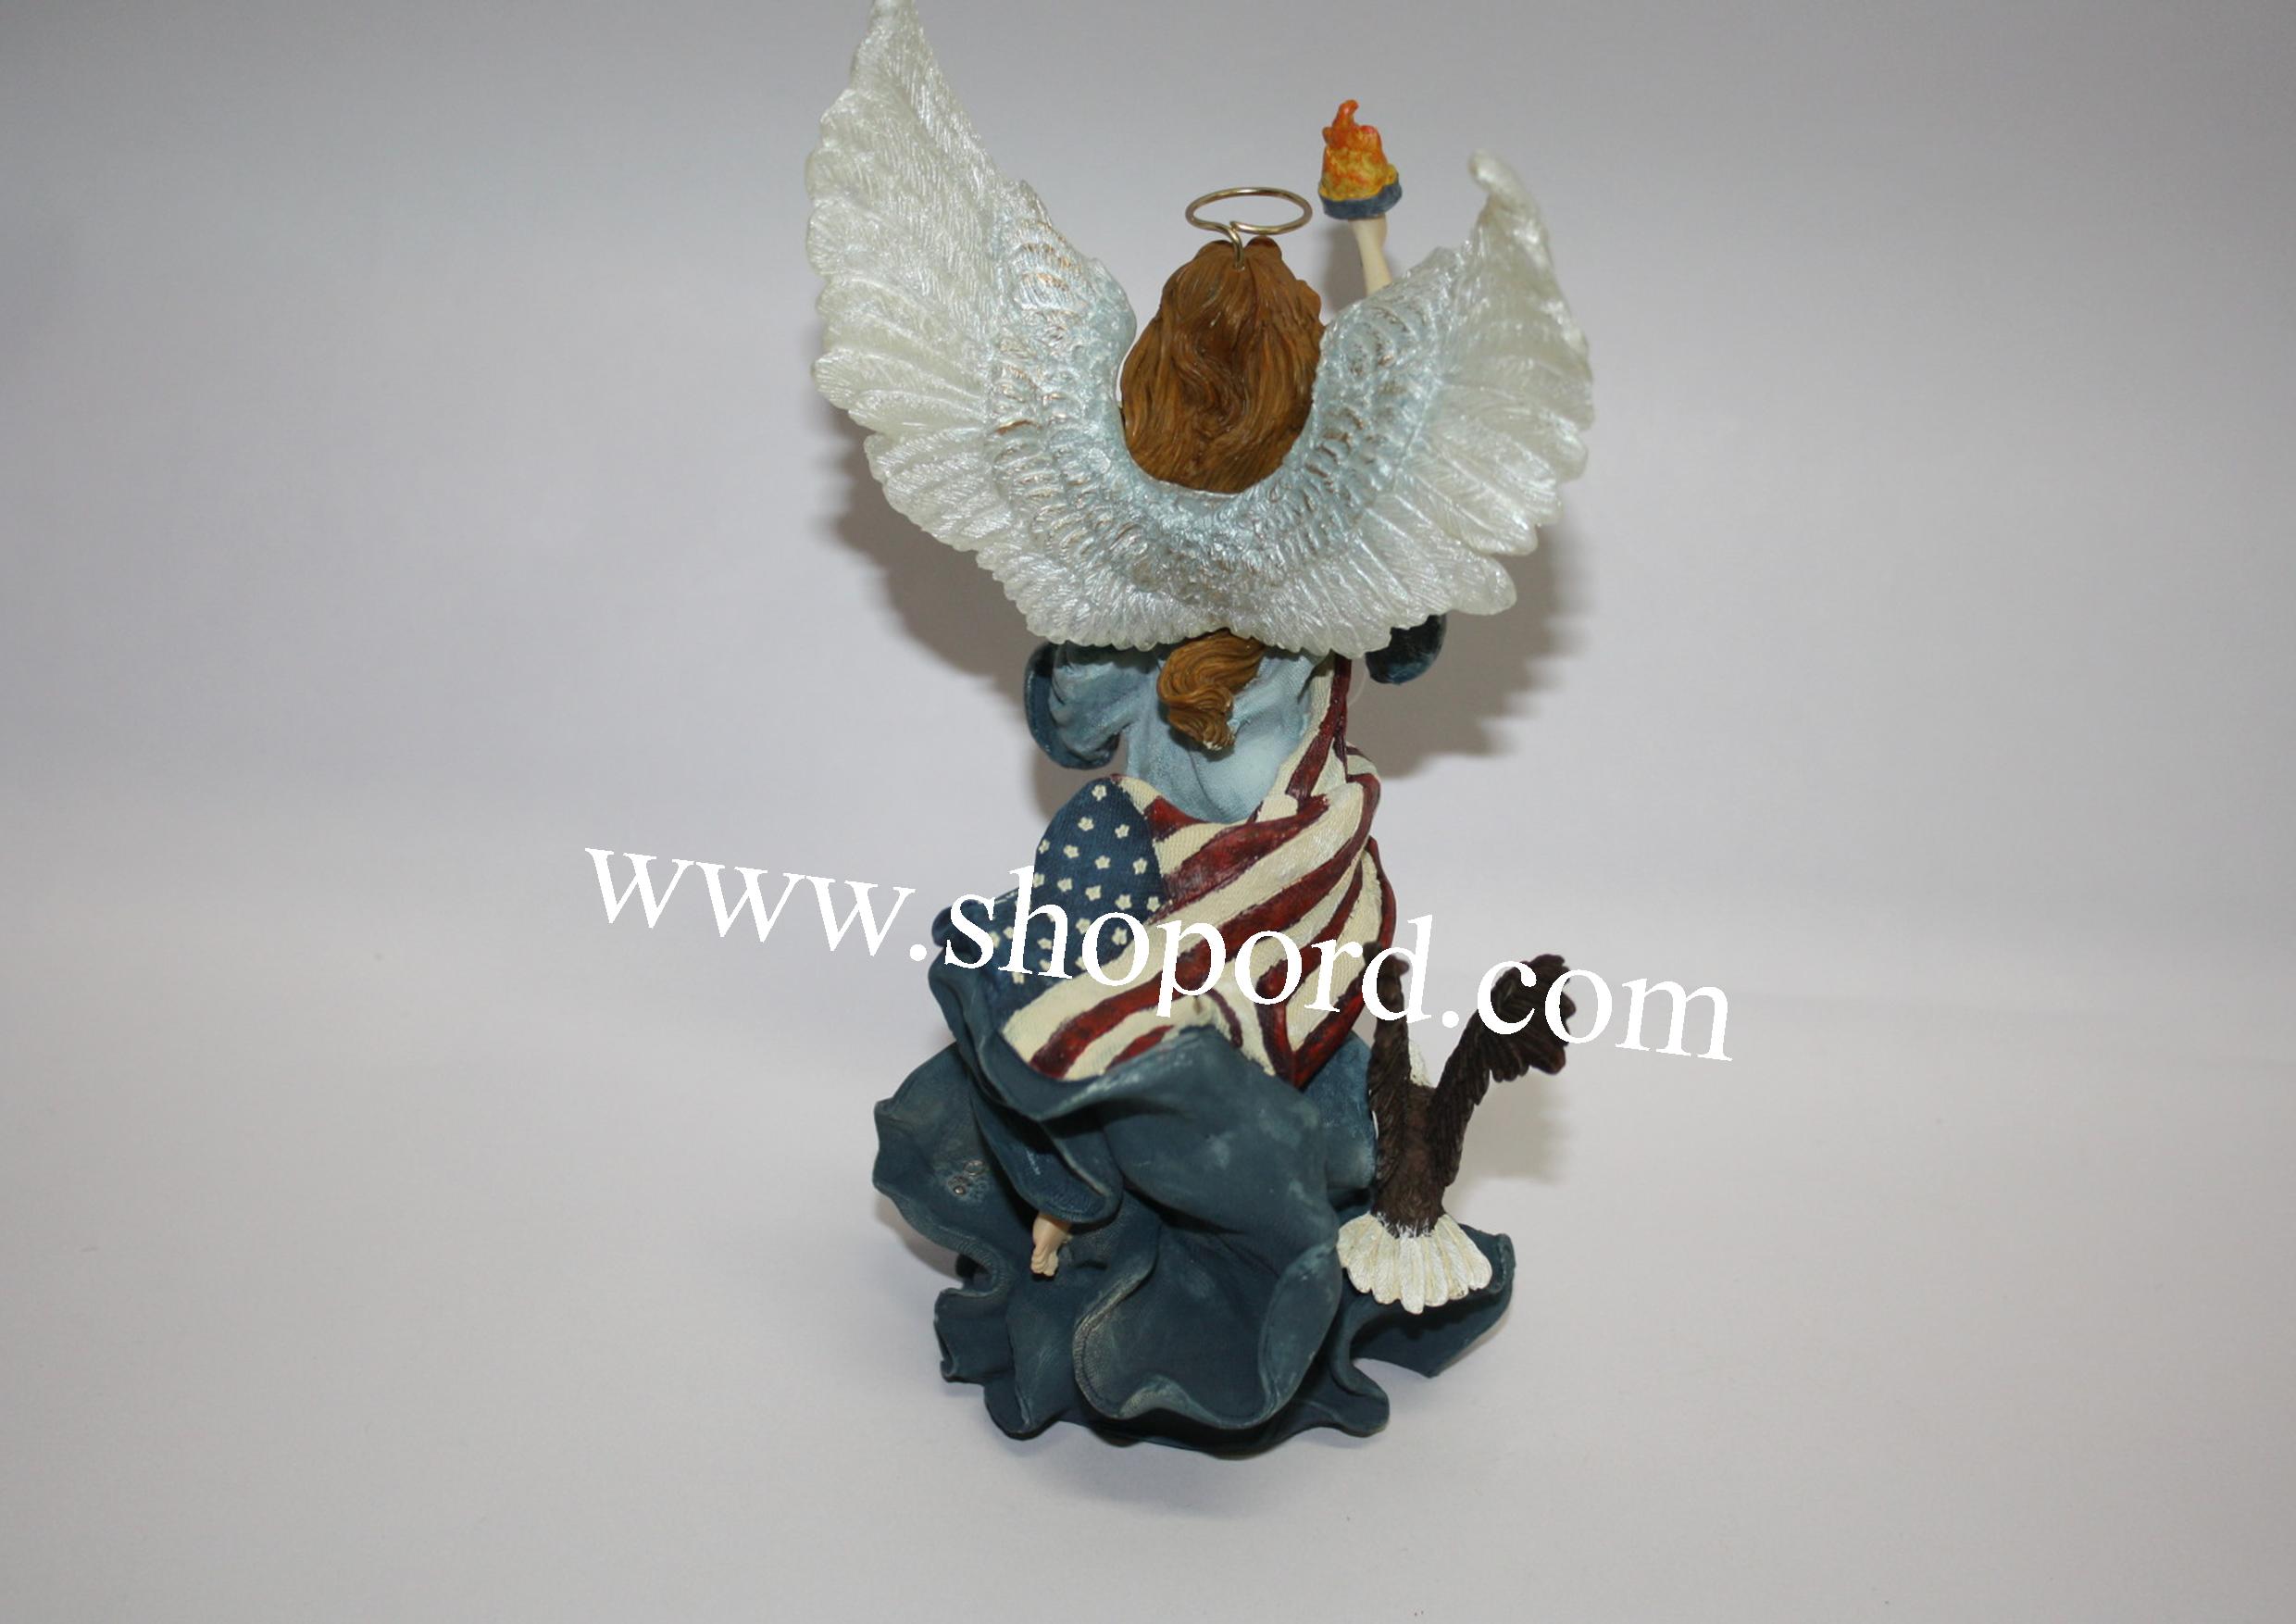 Boyds The Charming Angels Collection - Liberty (Guardian of Freedom ...